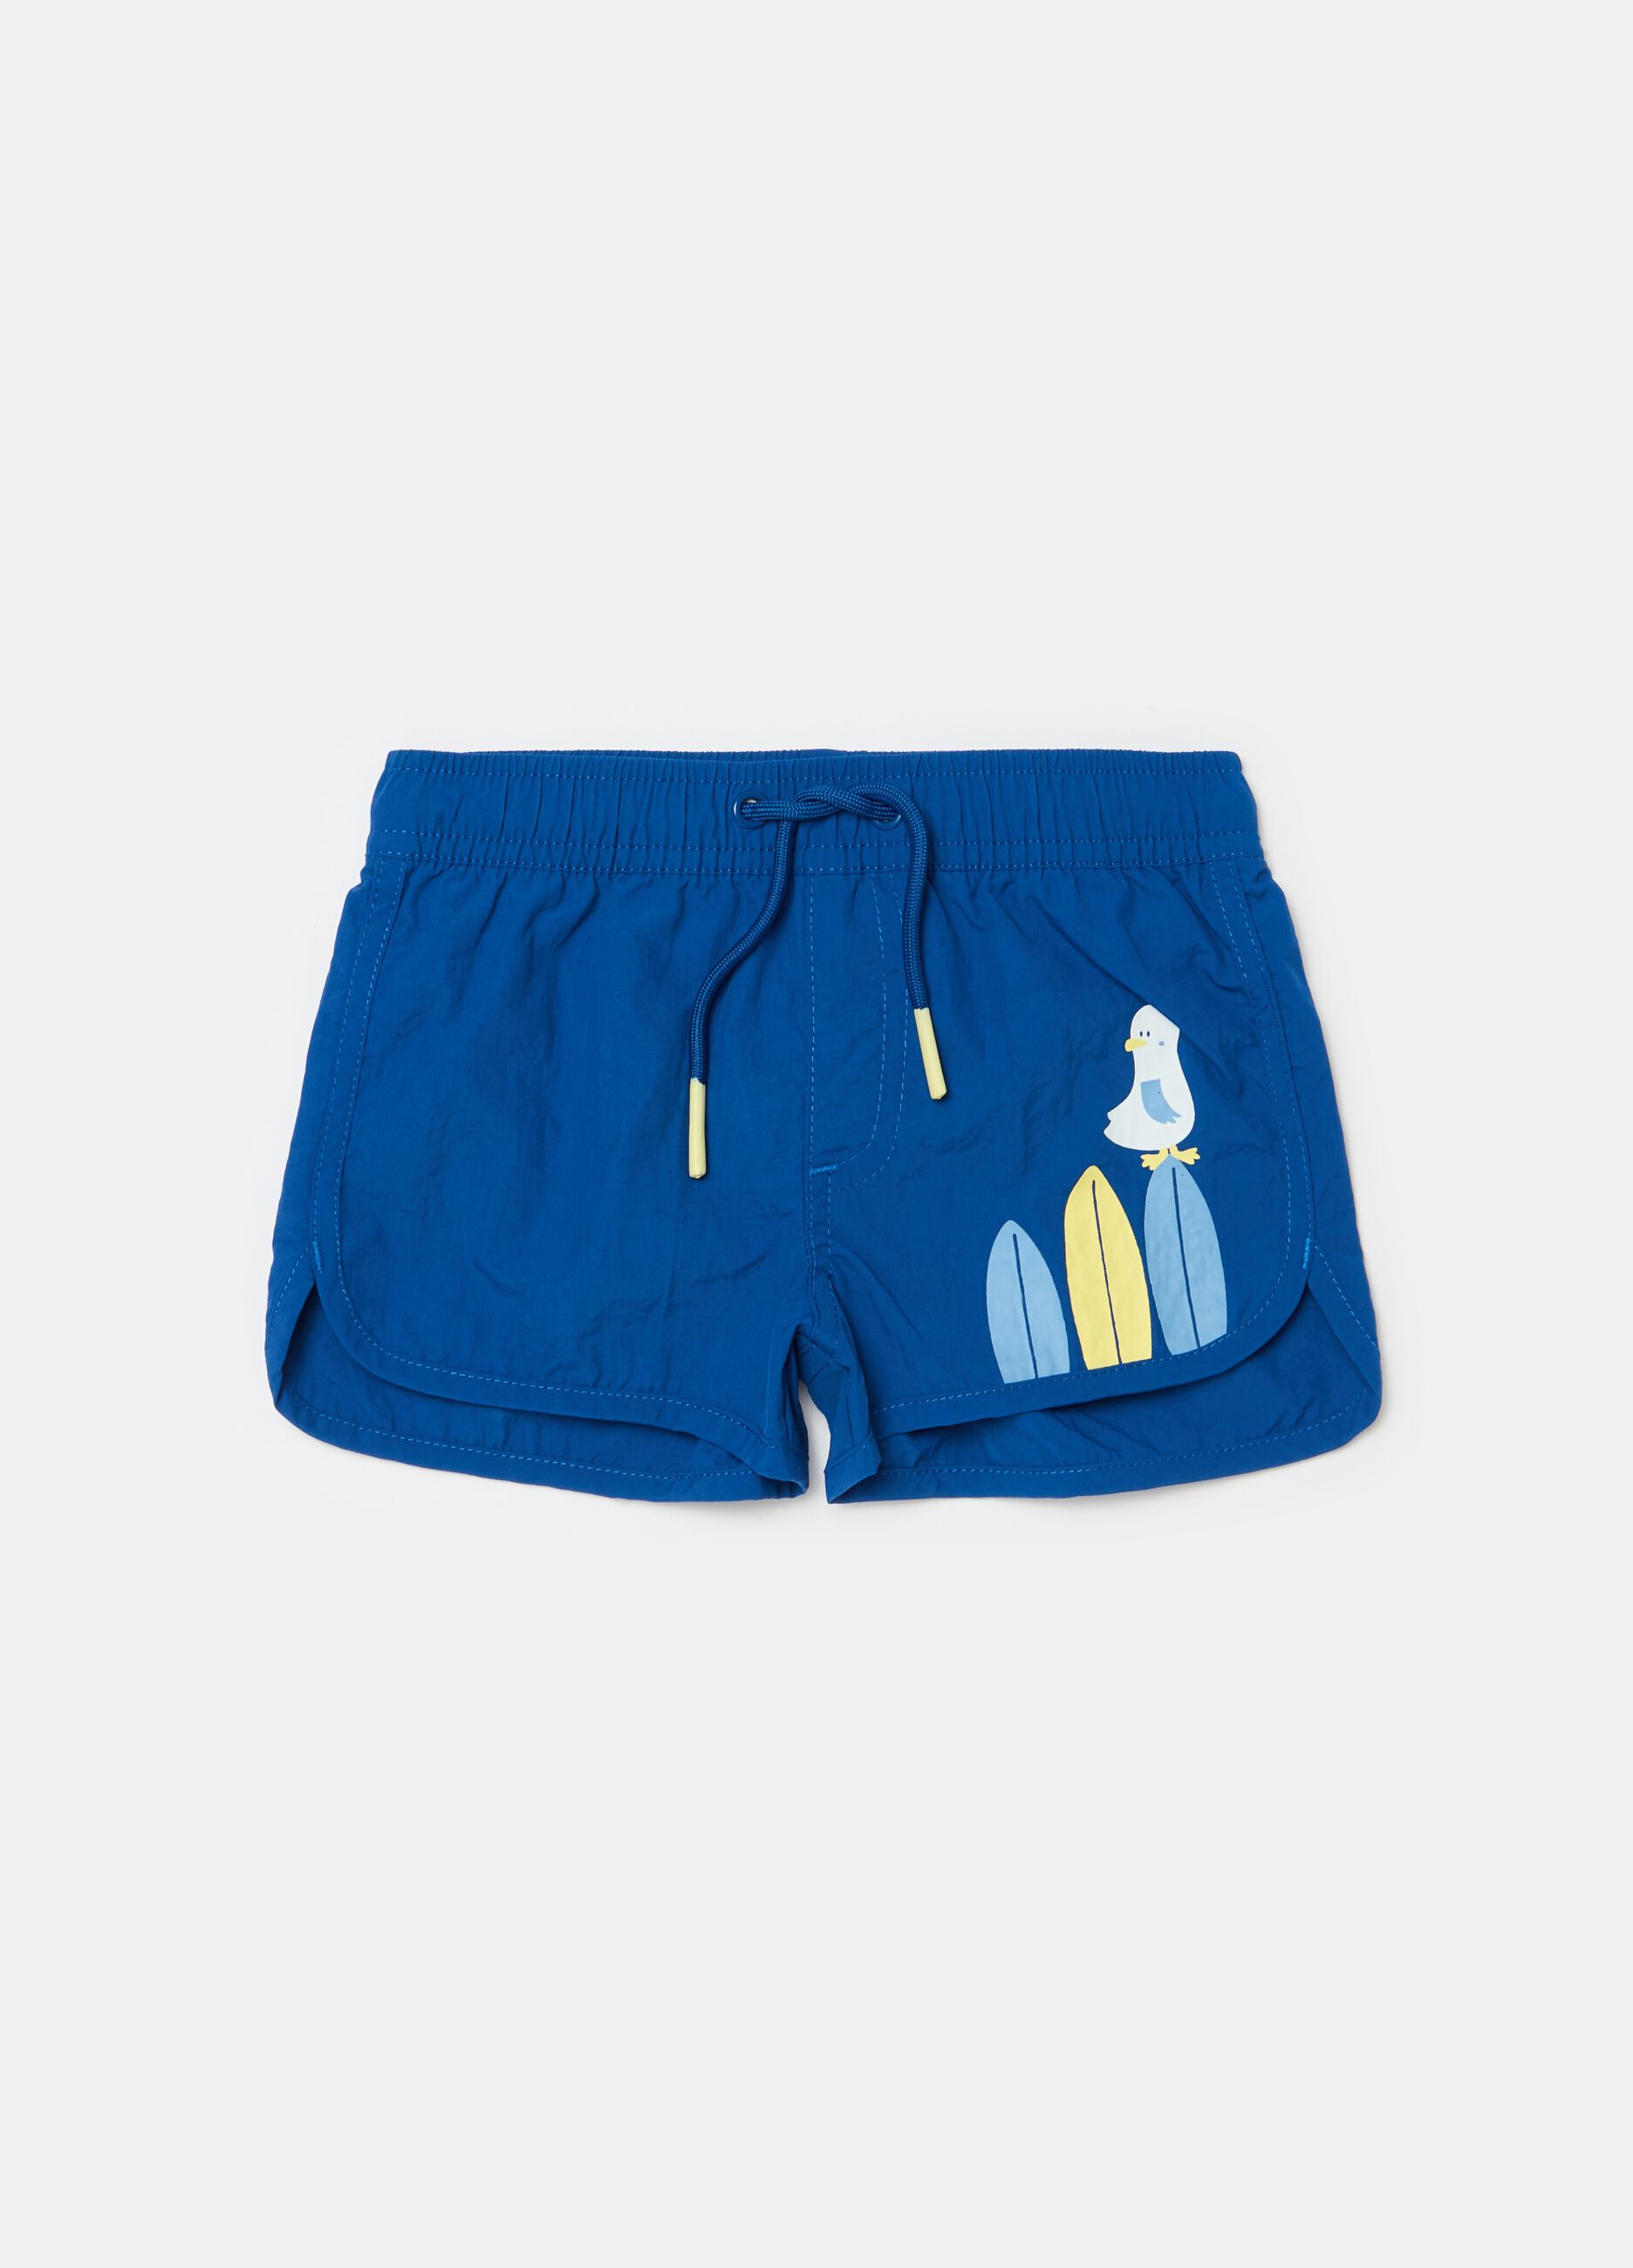 Swimming trunks with drawstring and seagull print